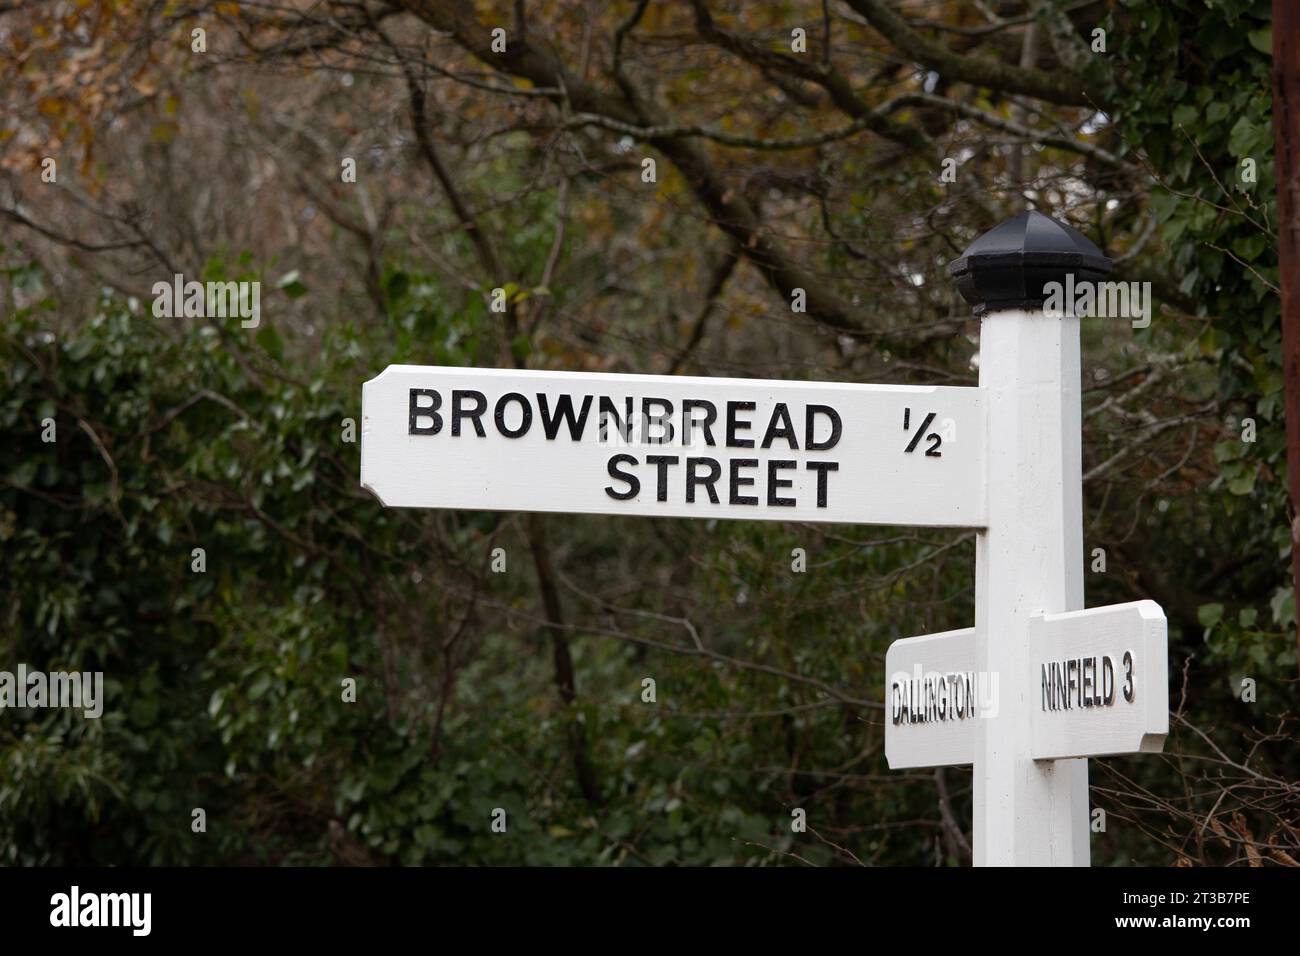 Road sign for Brownbread Street in East Sussex, England. Stock Photo